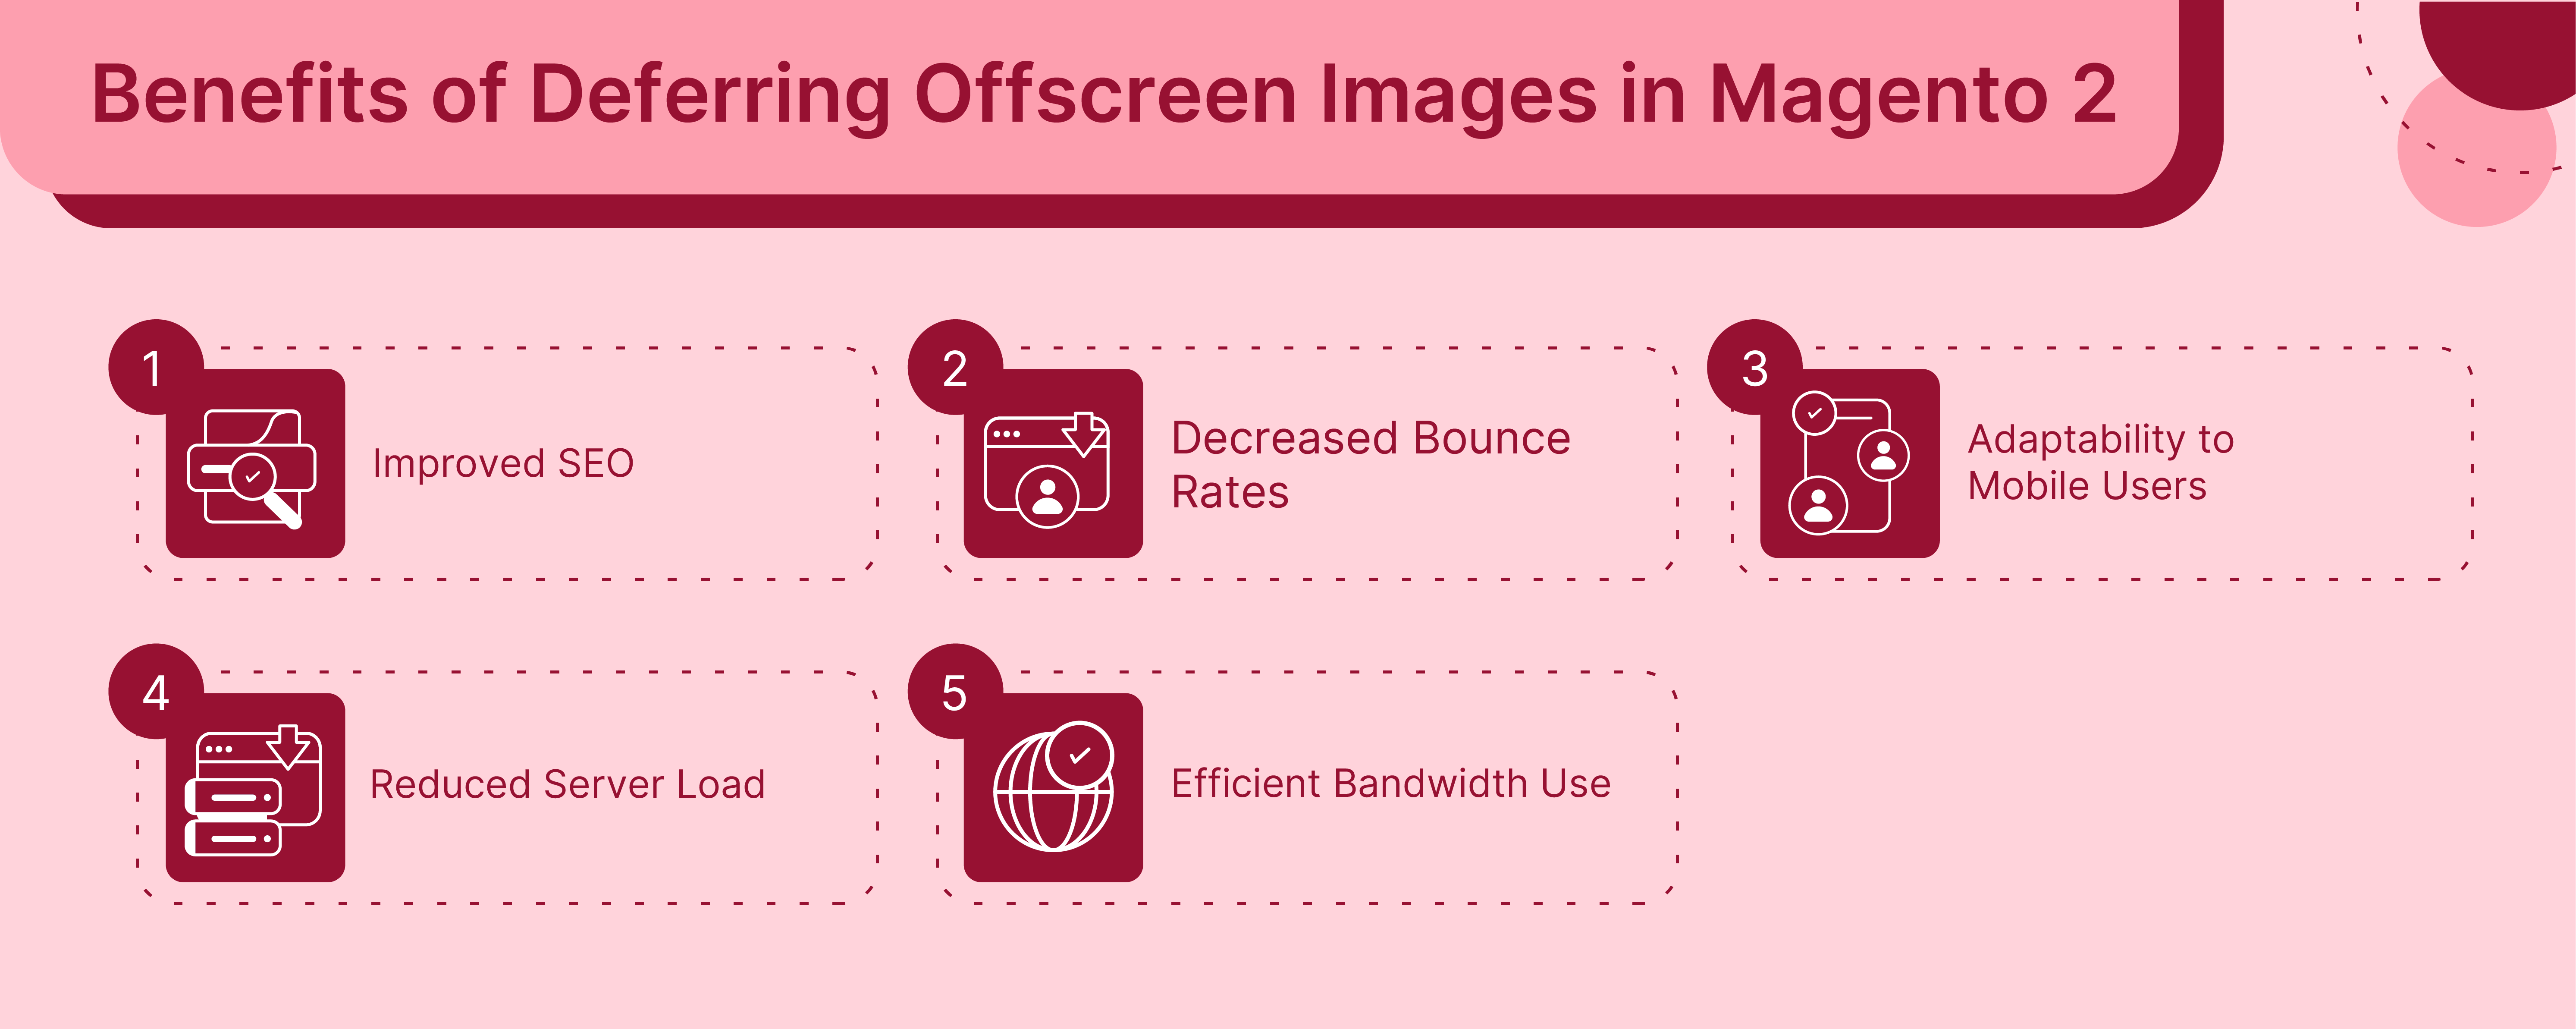 Benefits of deferring offscreen images in Magento 2